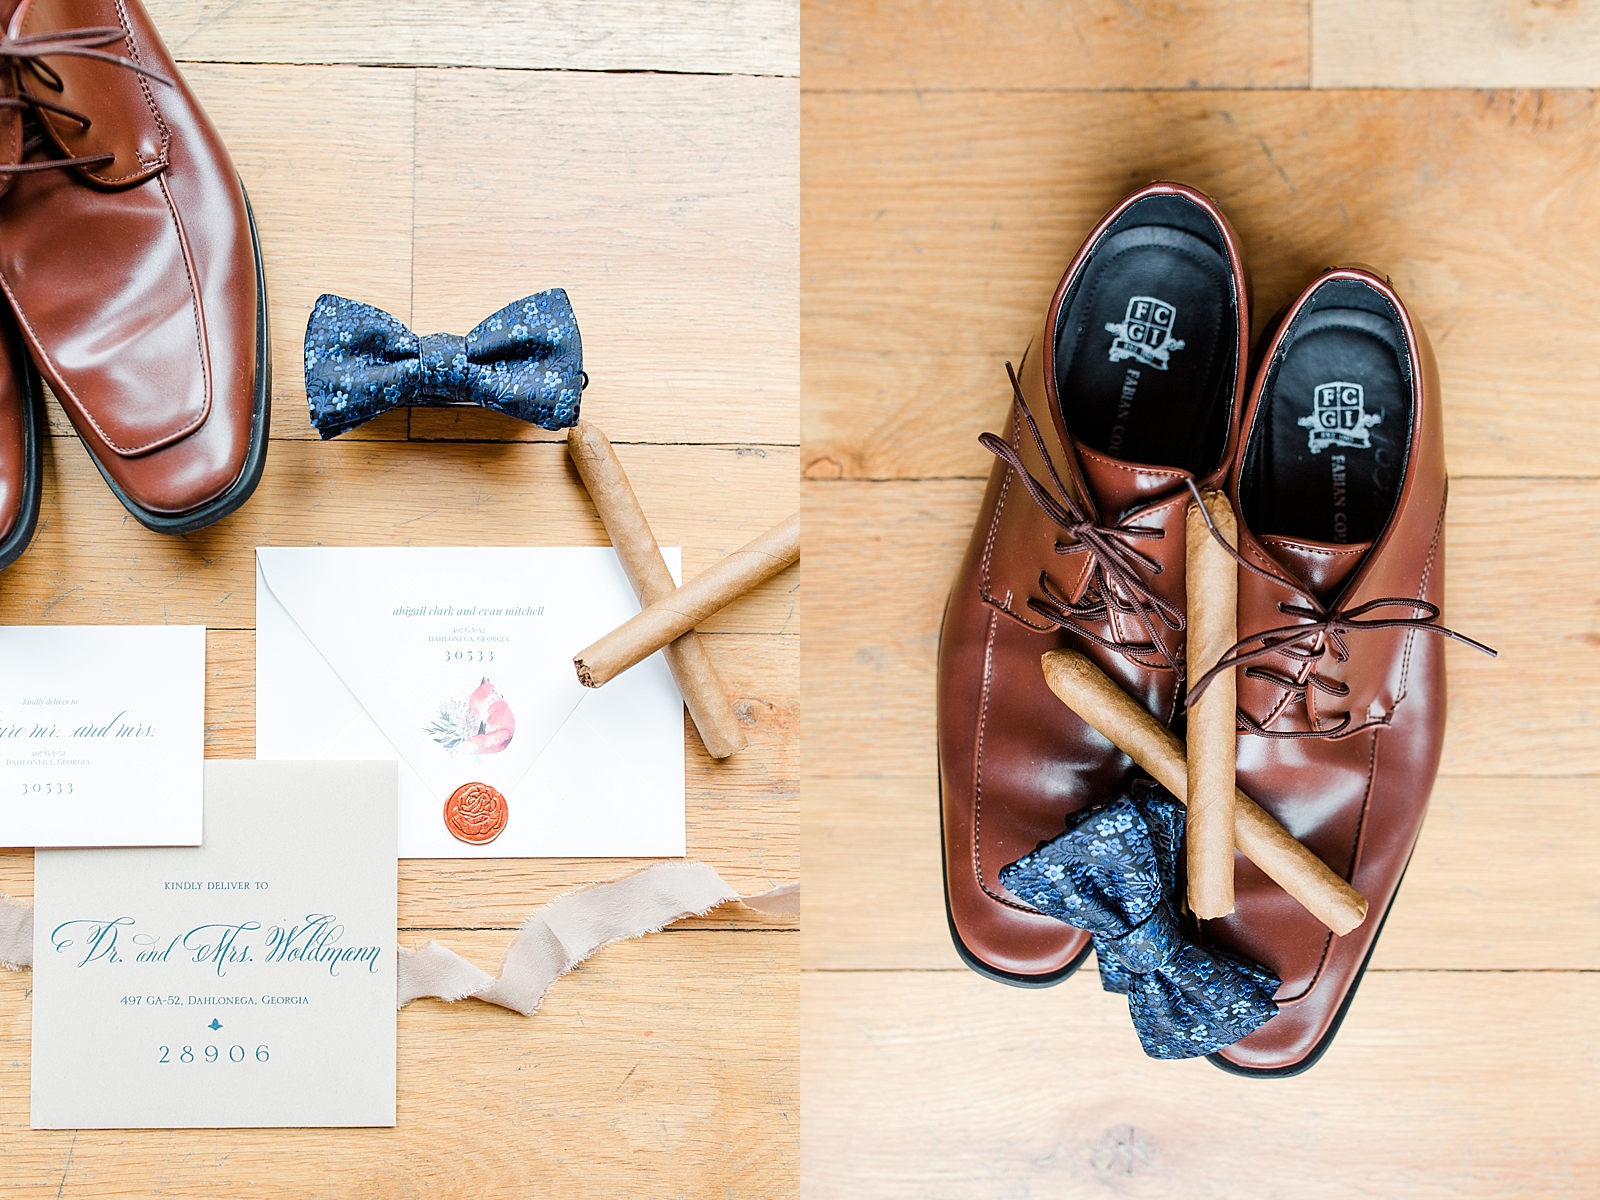 Juliette Chapel Wedding Groom Details Invitation with shoes and cigar and shoes with bow tie and cigars Photos